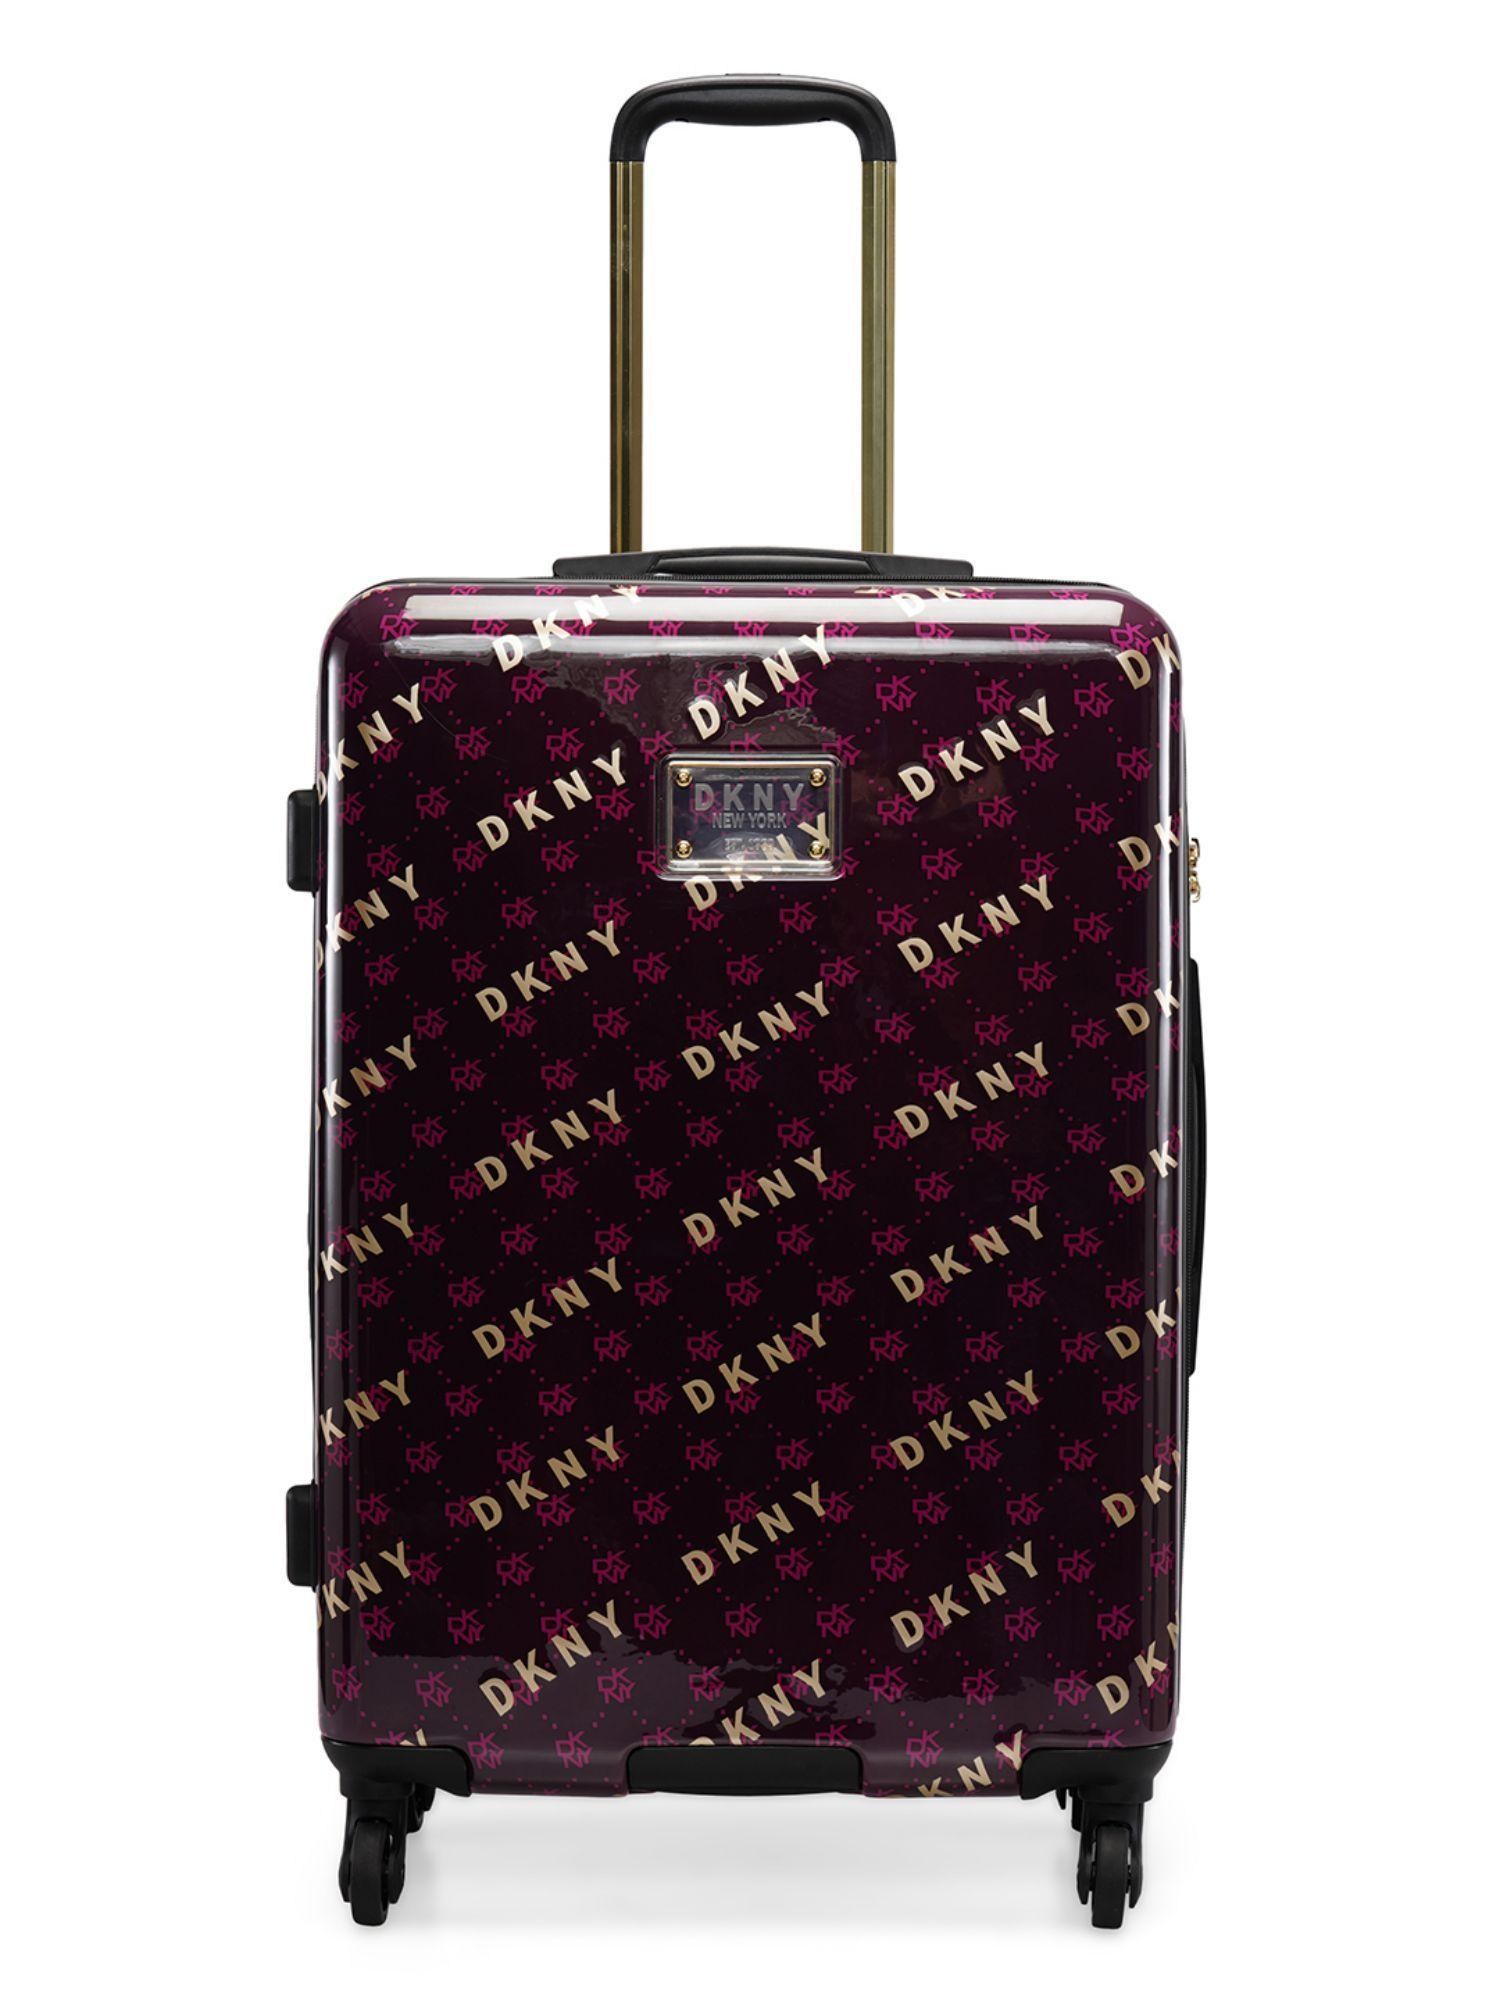 on repeat aubergine & pink color abs material hard 20 inches cabin size trolley